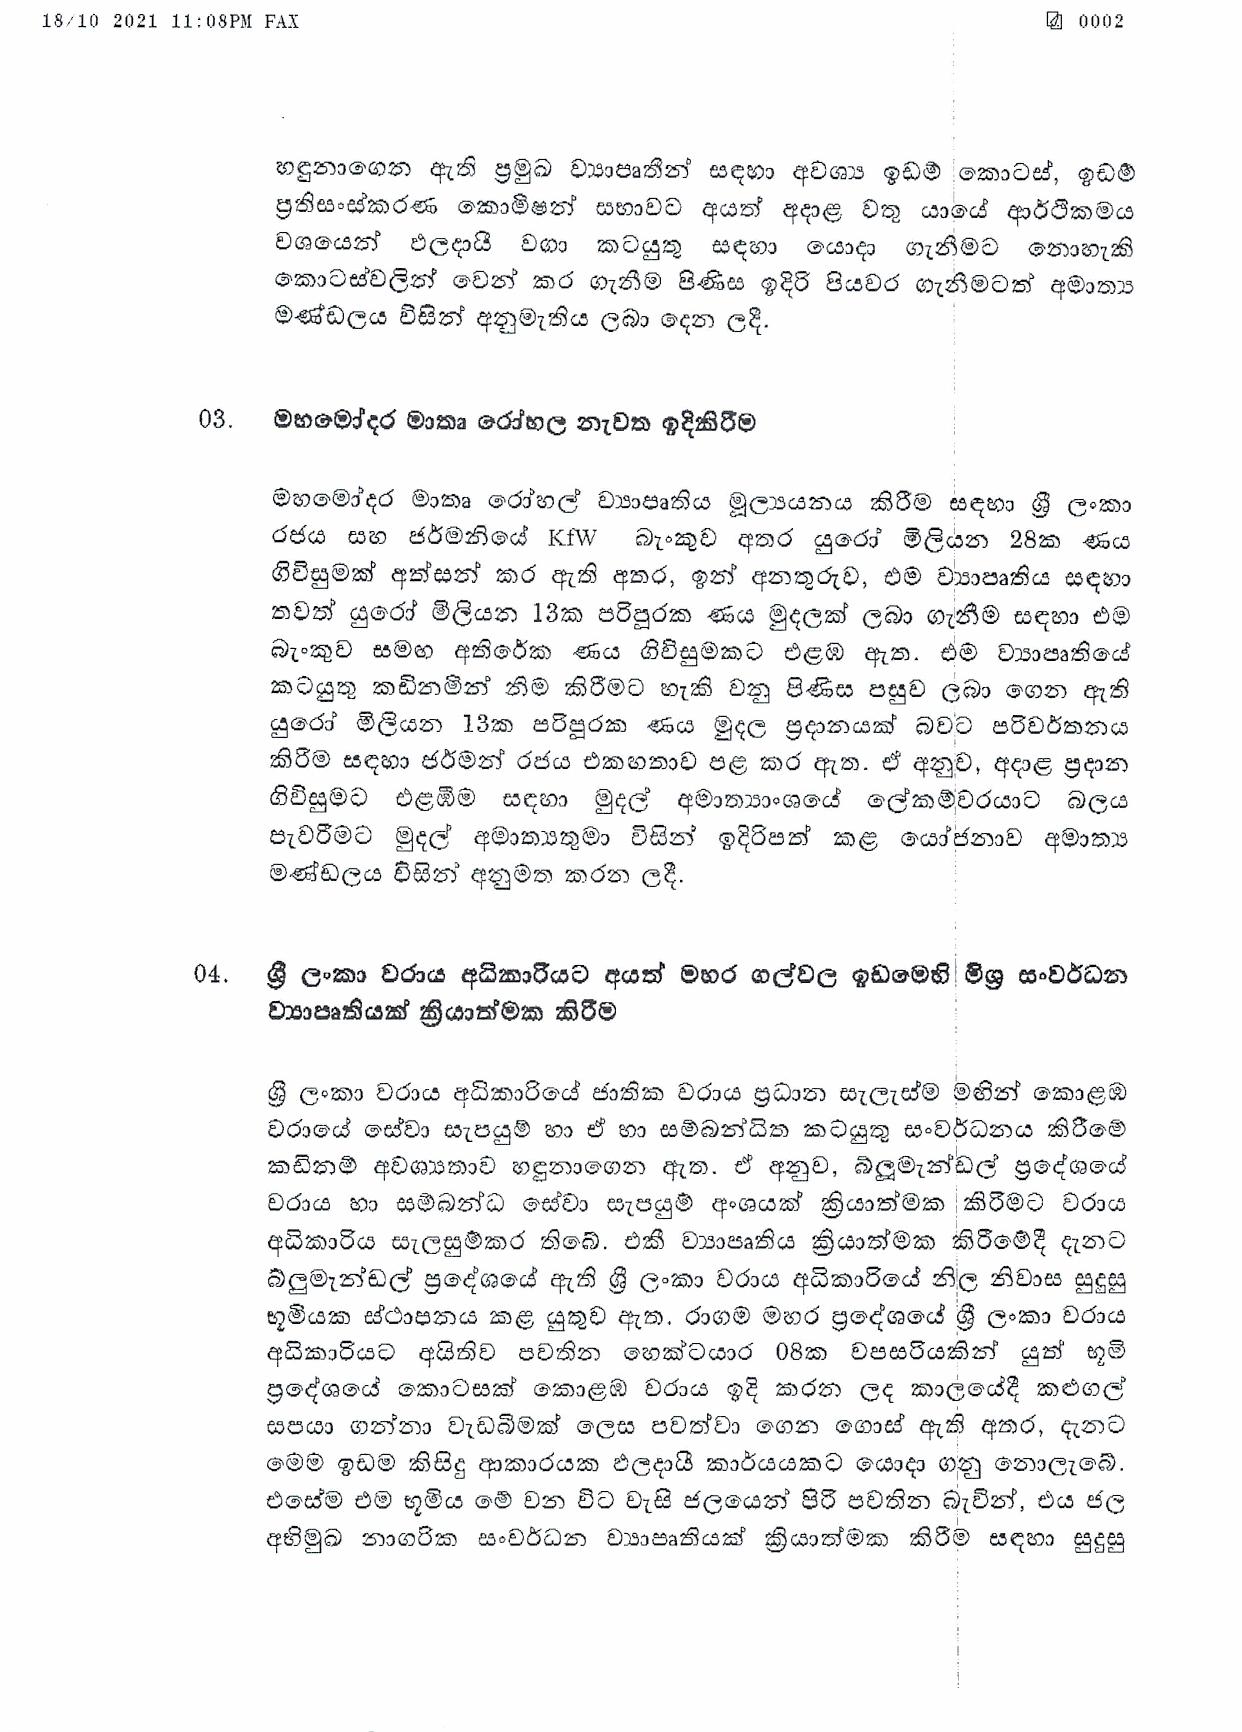 Cabinet Decision on 18.10.2021 Sinhala page 002